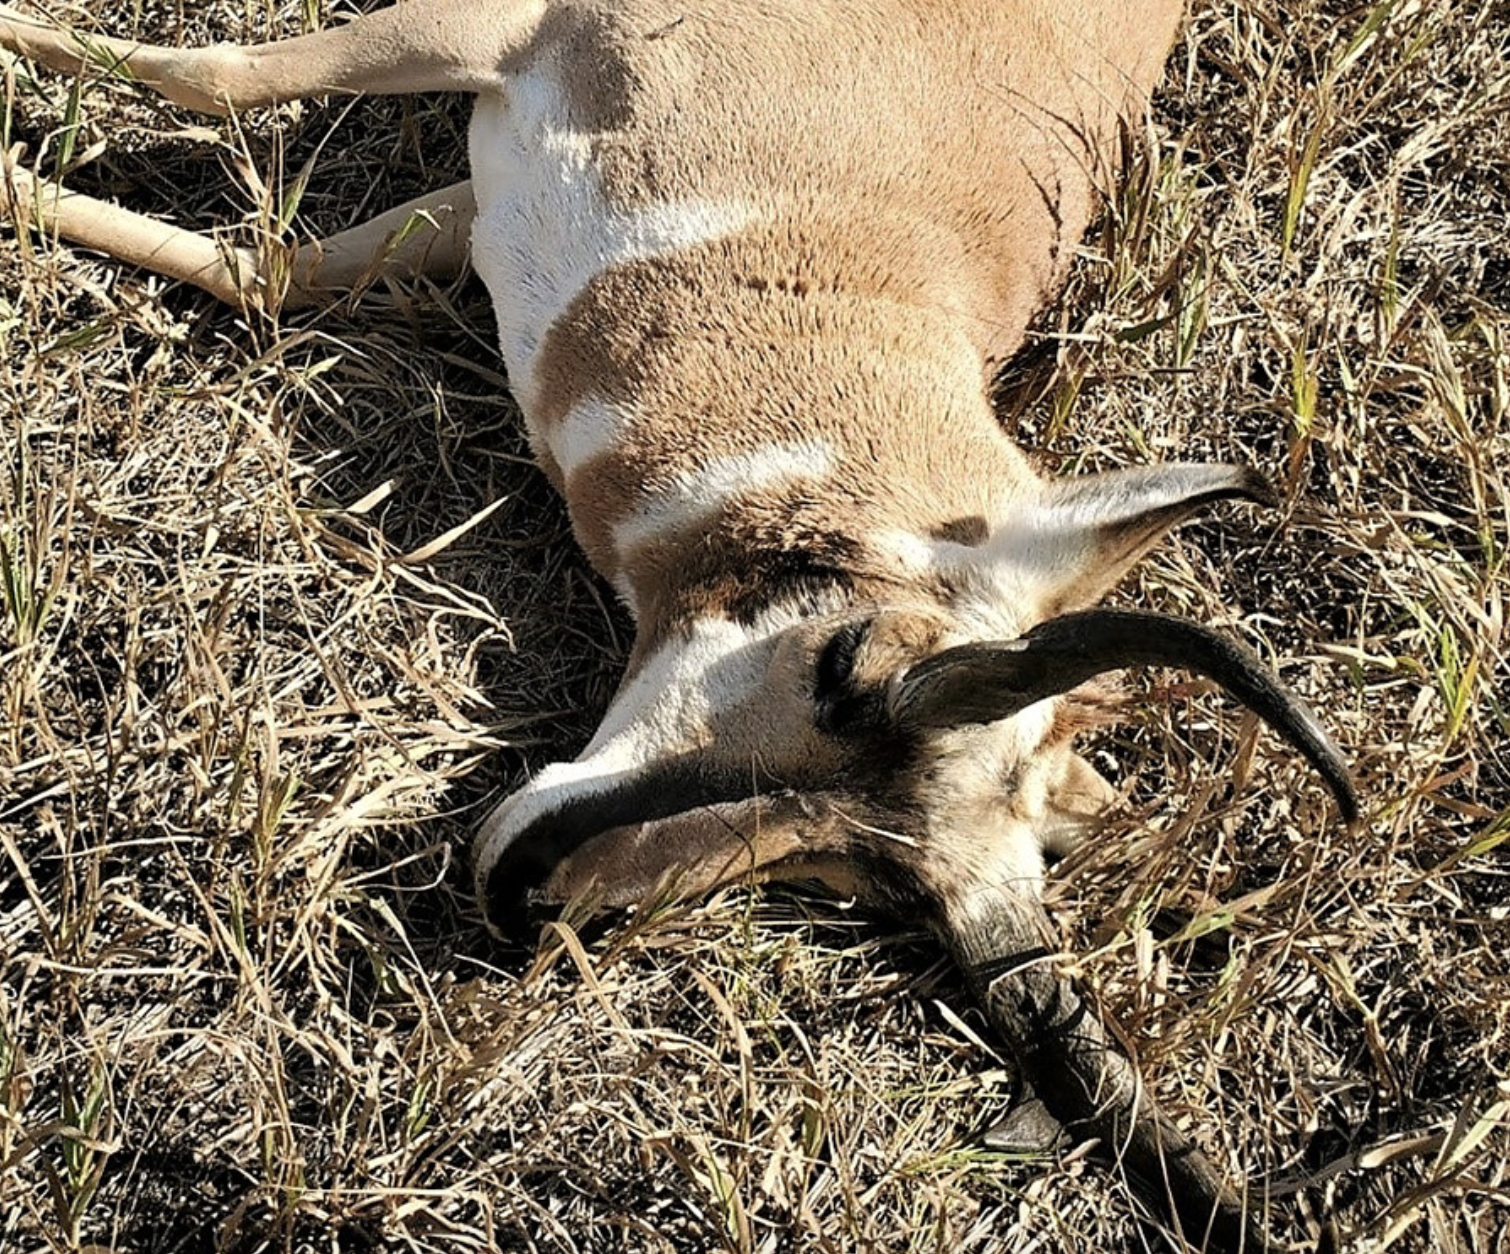 The dead pronghorn was just one of the animals killed by the trio of out-of-state poachers